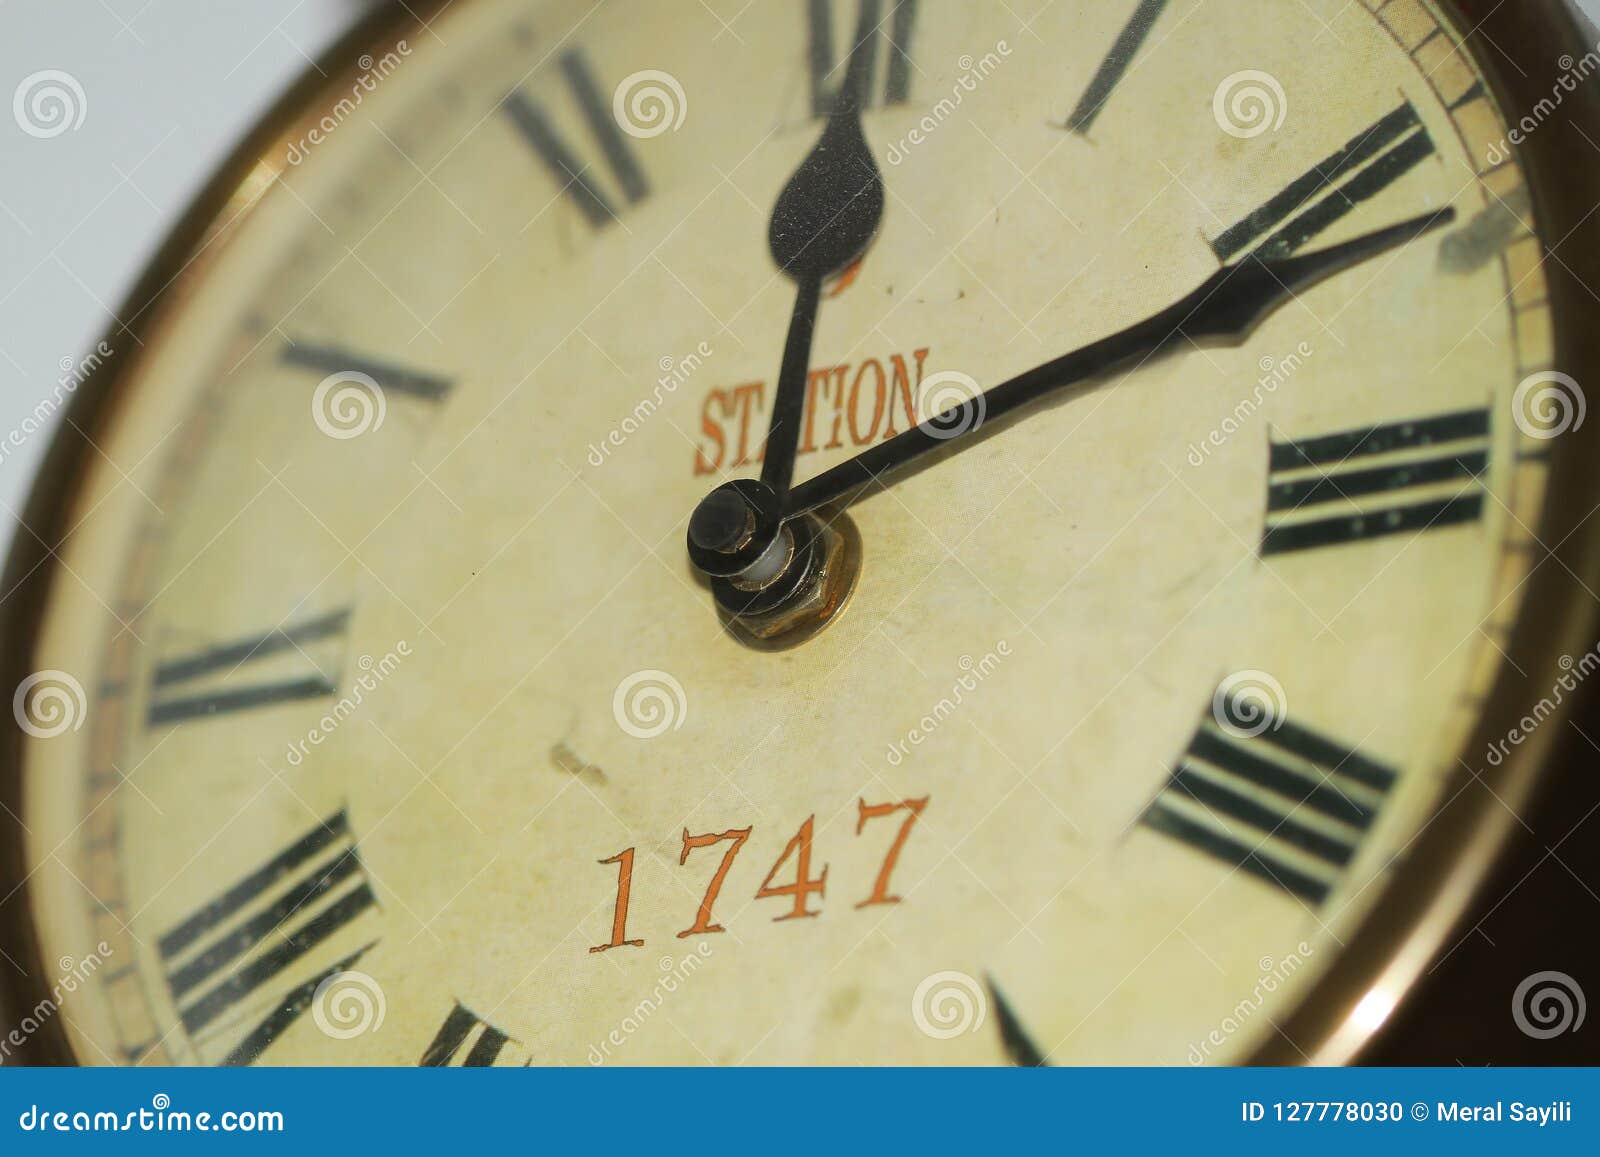 an image of a nice clock showing daylight saving time